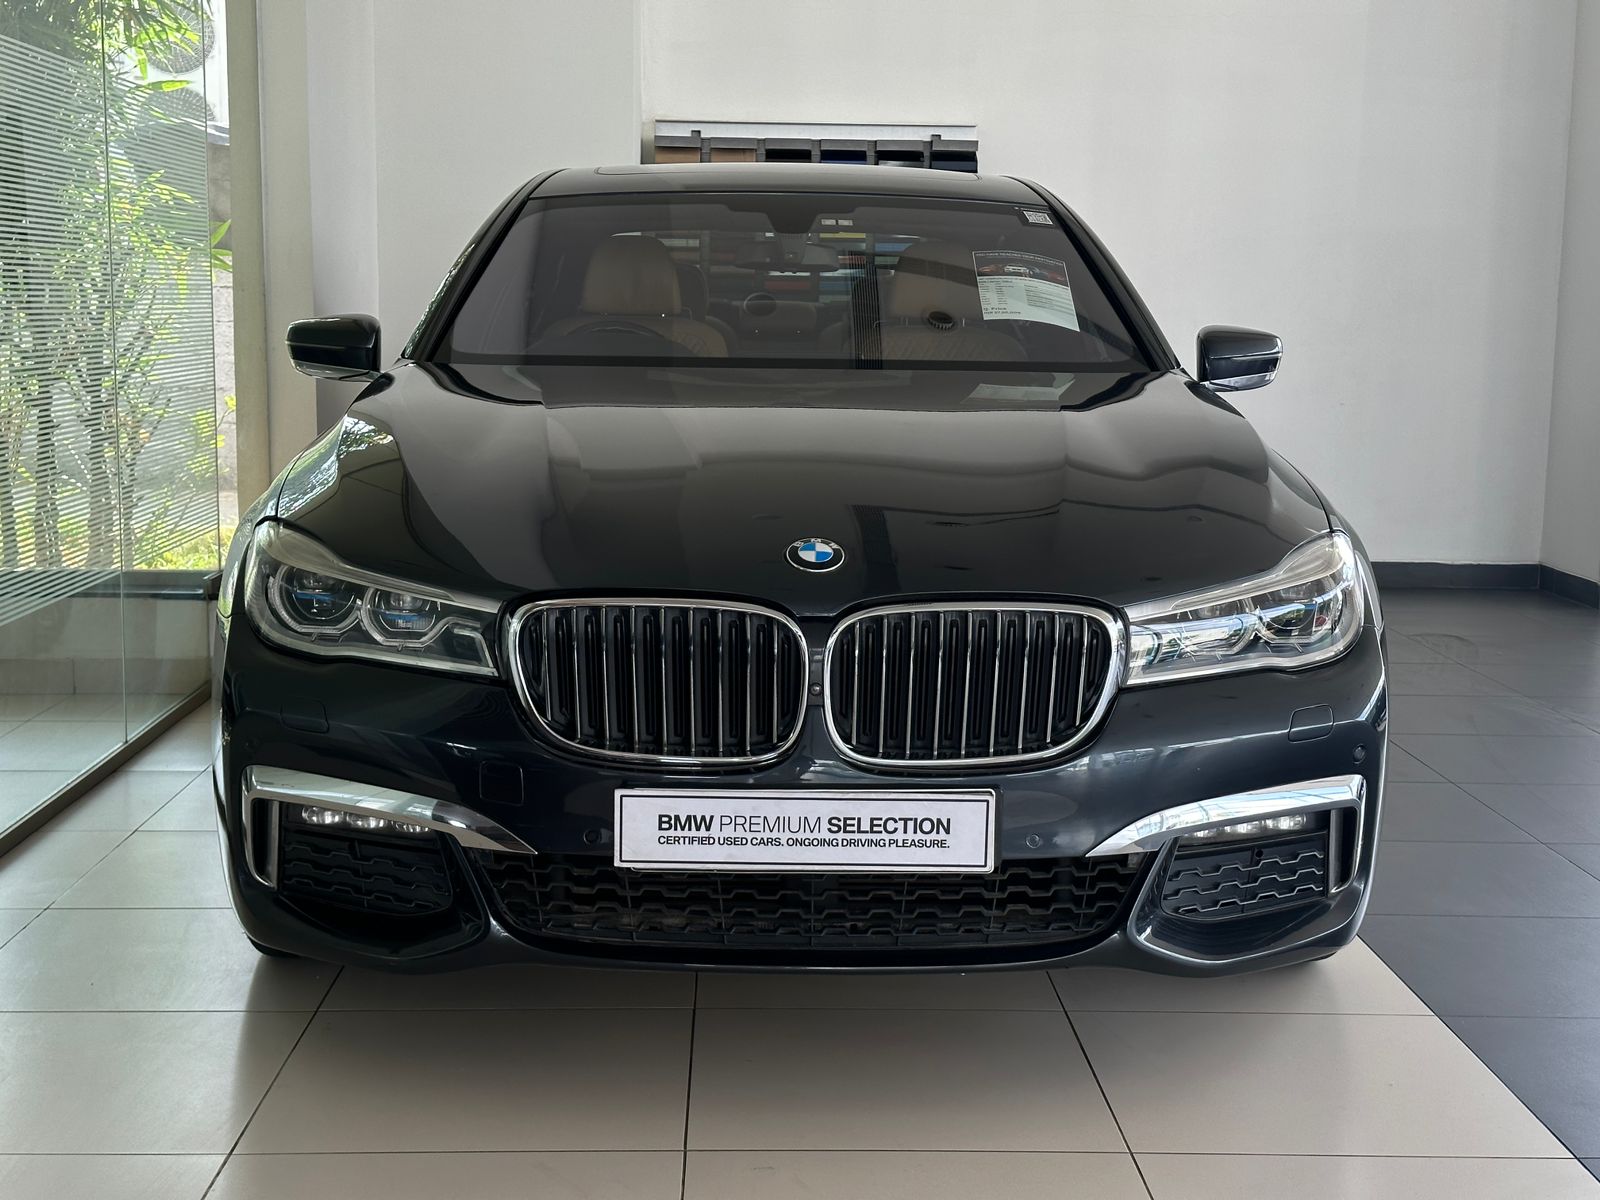 BMW 730 LD - 2016 model - 76949 kms front